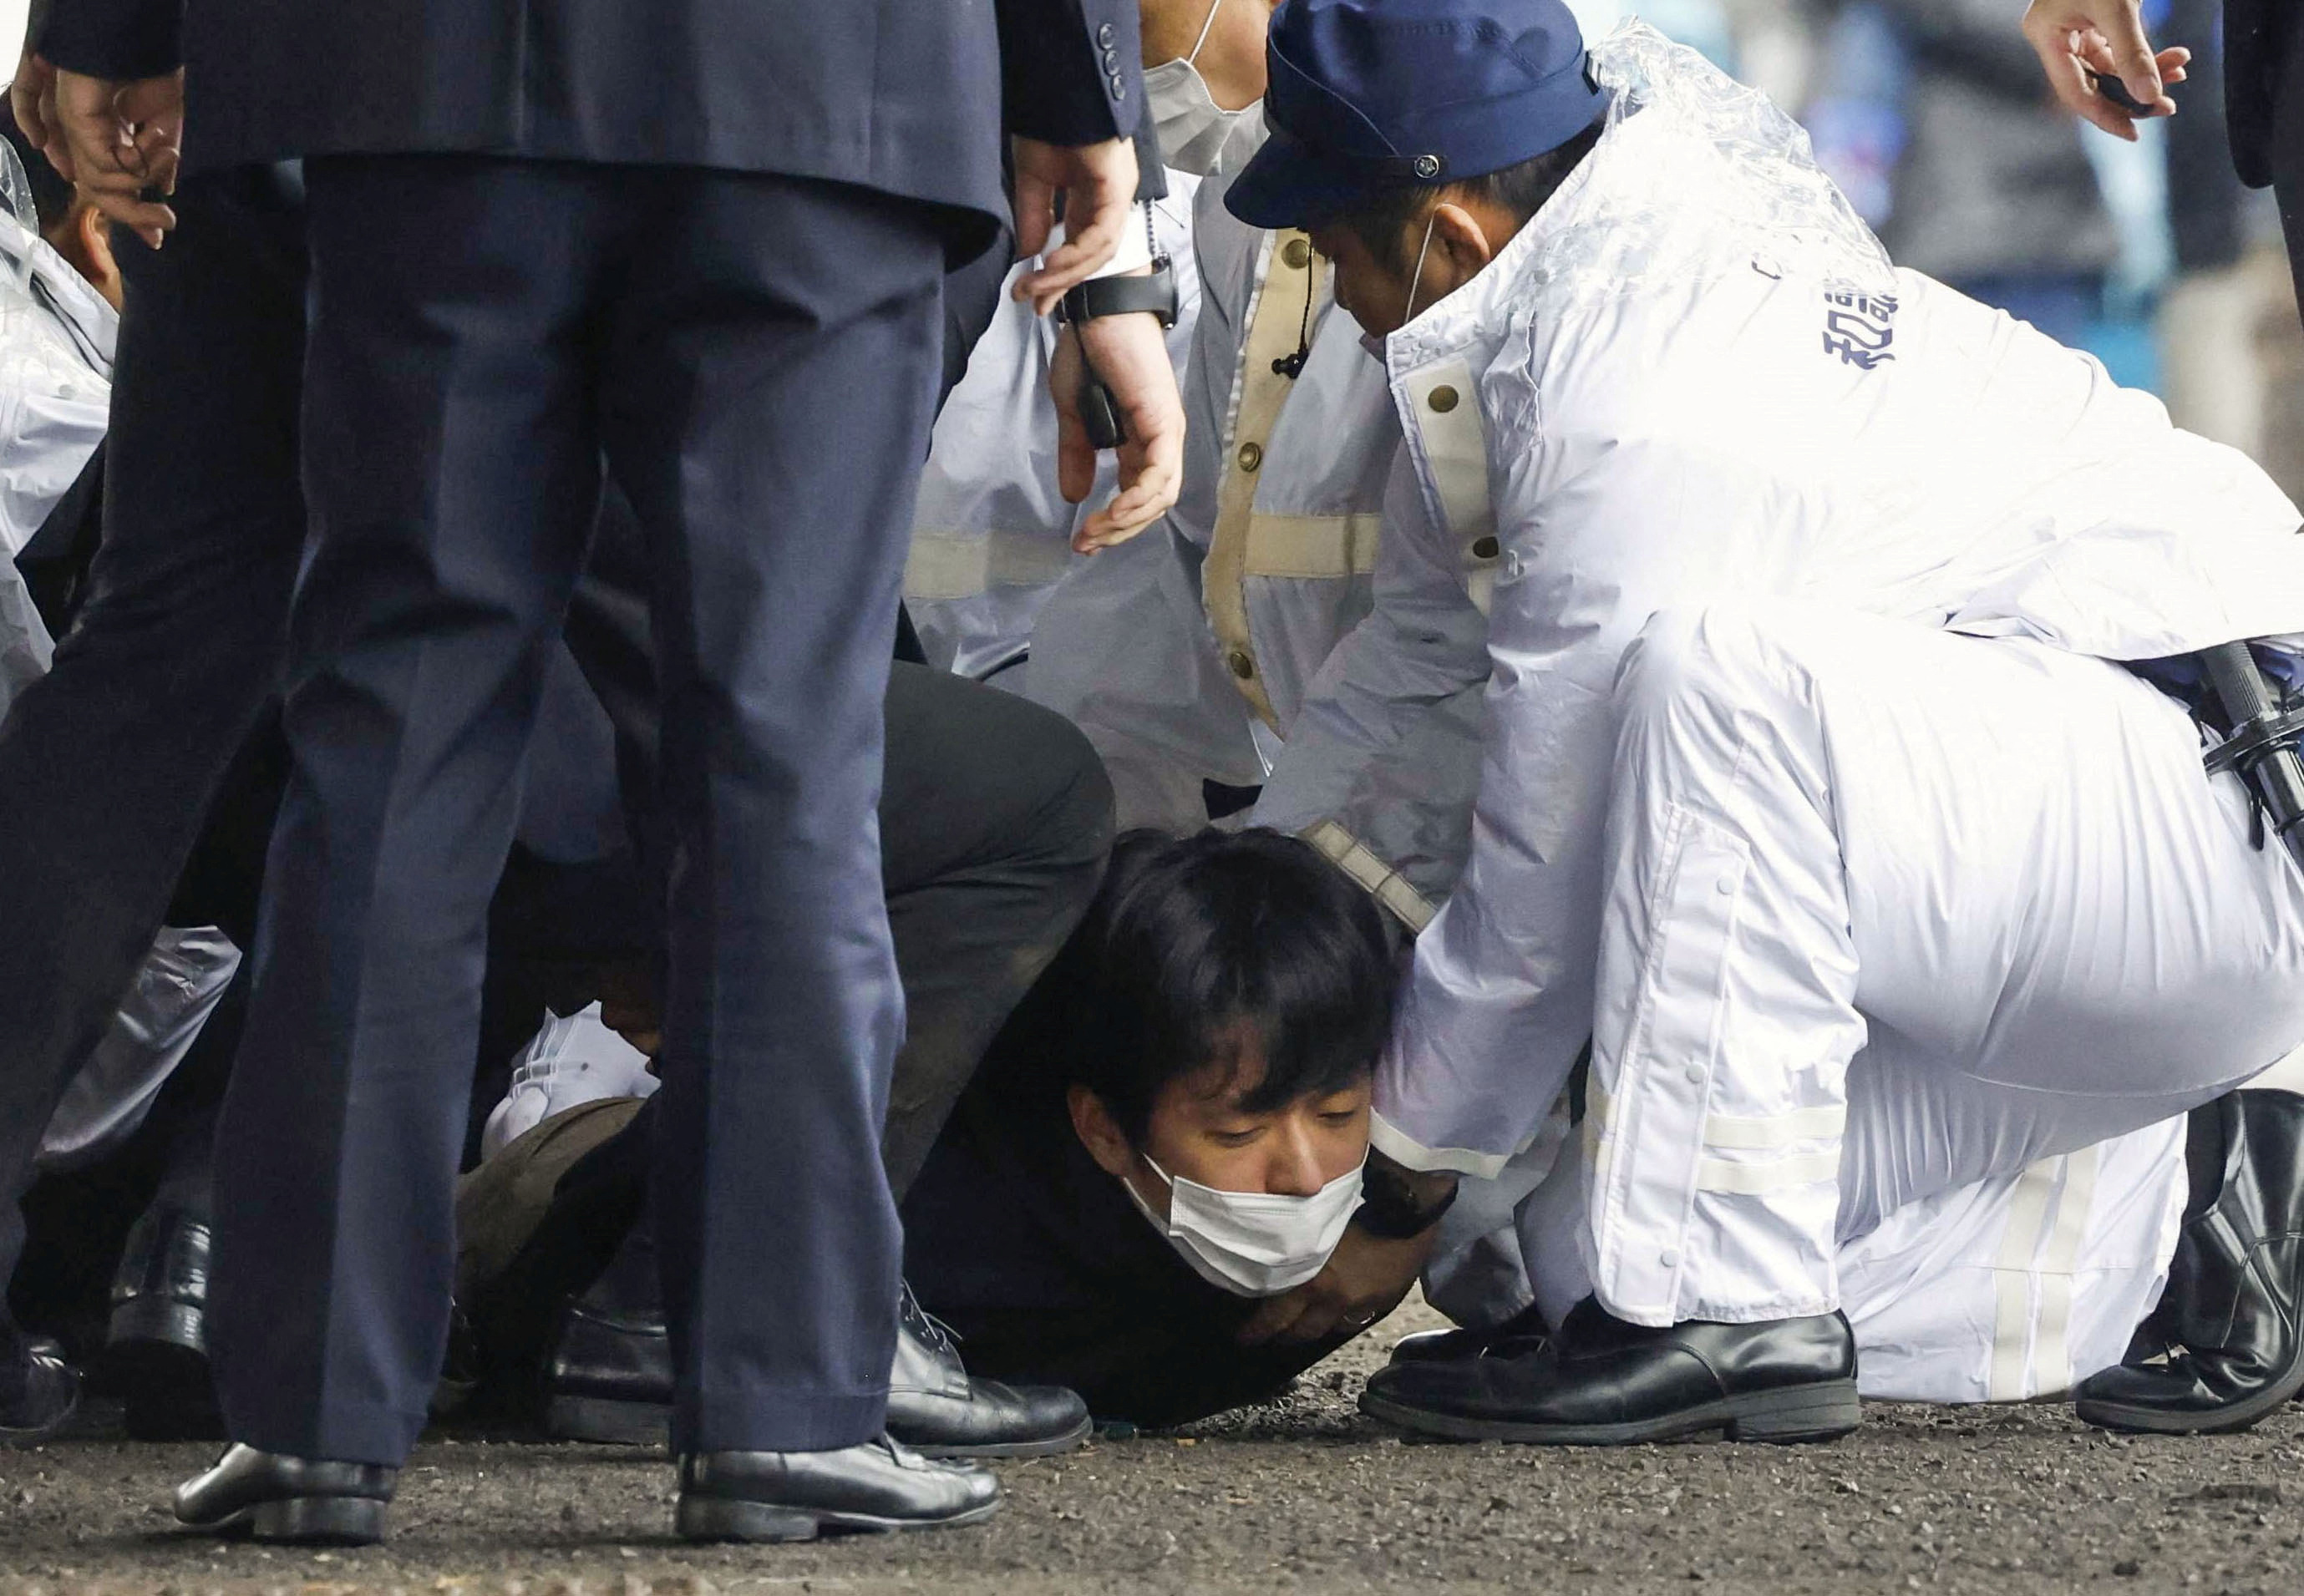 A man, believed to be a suspect who threw a pipe-like object near Japanese Prime Minister Fumio Kishida during his outdoor speech, is held by police officers in Wakayama